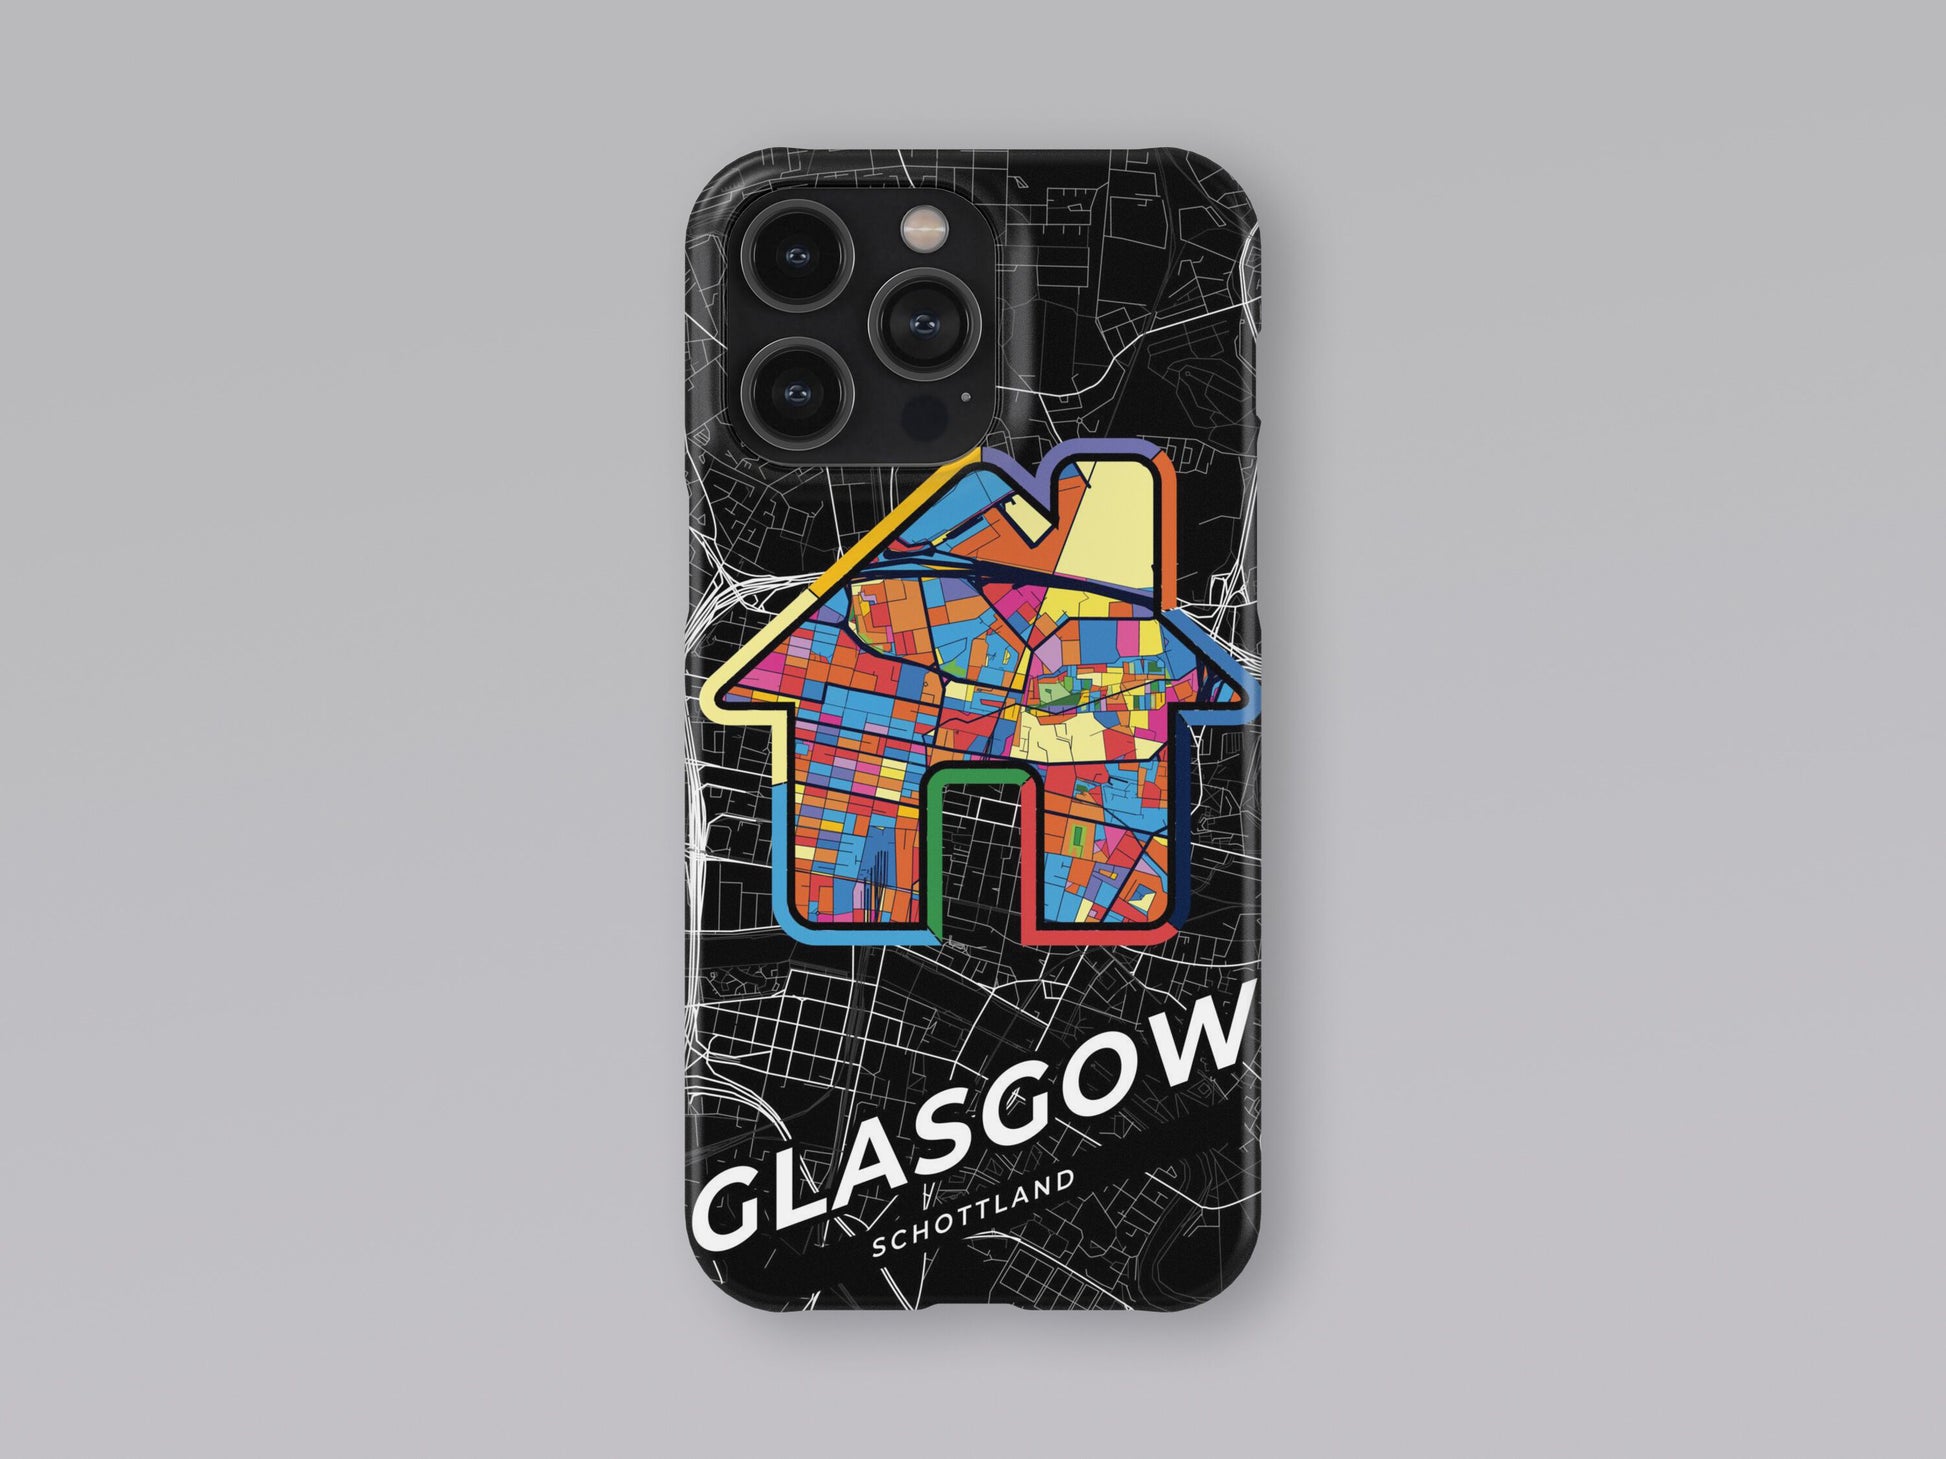 Glasgow Scotland slim phone case with colorful icon. Birthday, wedding or housewarming gift. Couple match cases. 3